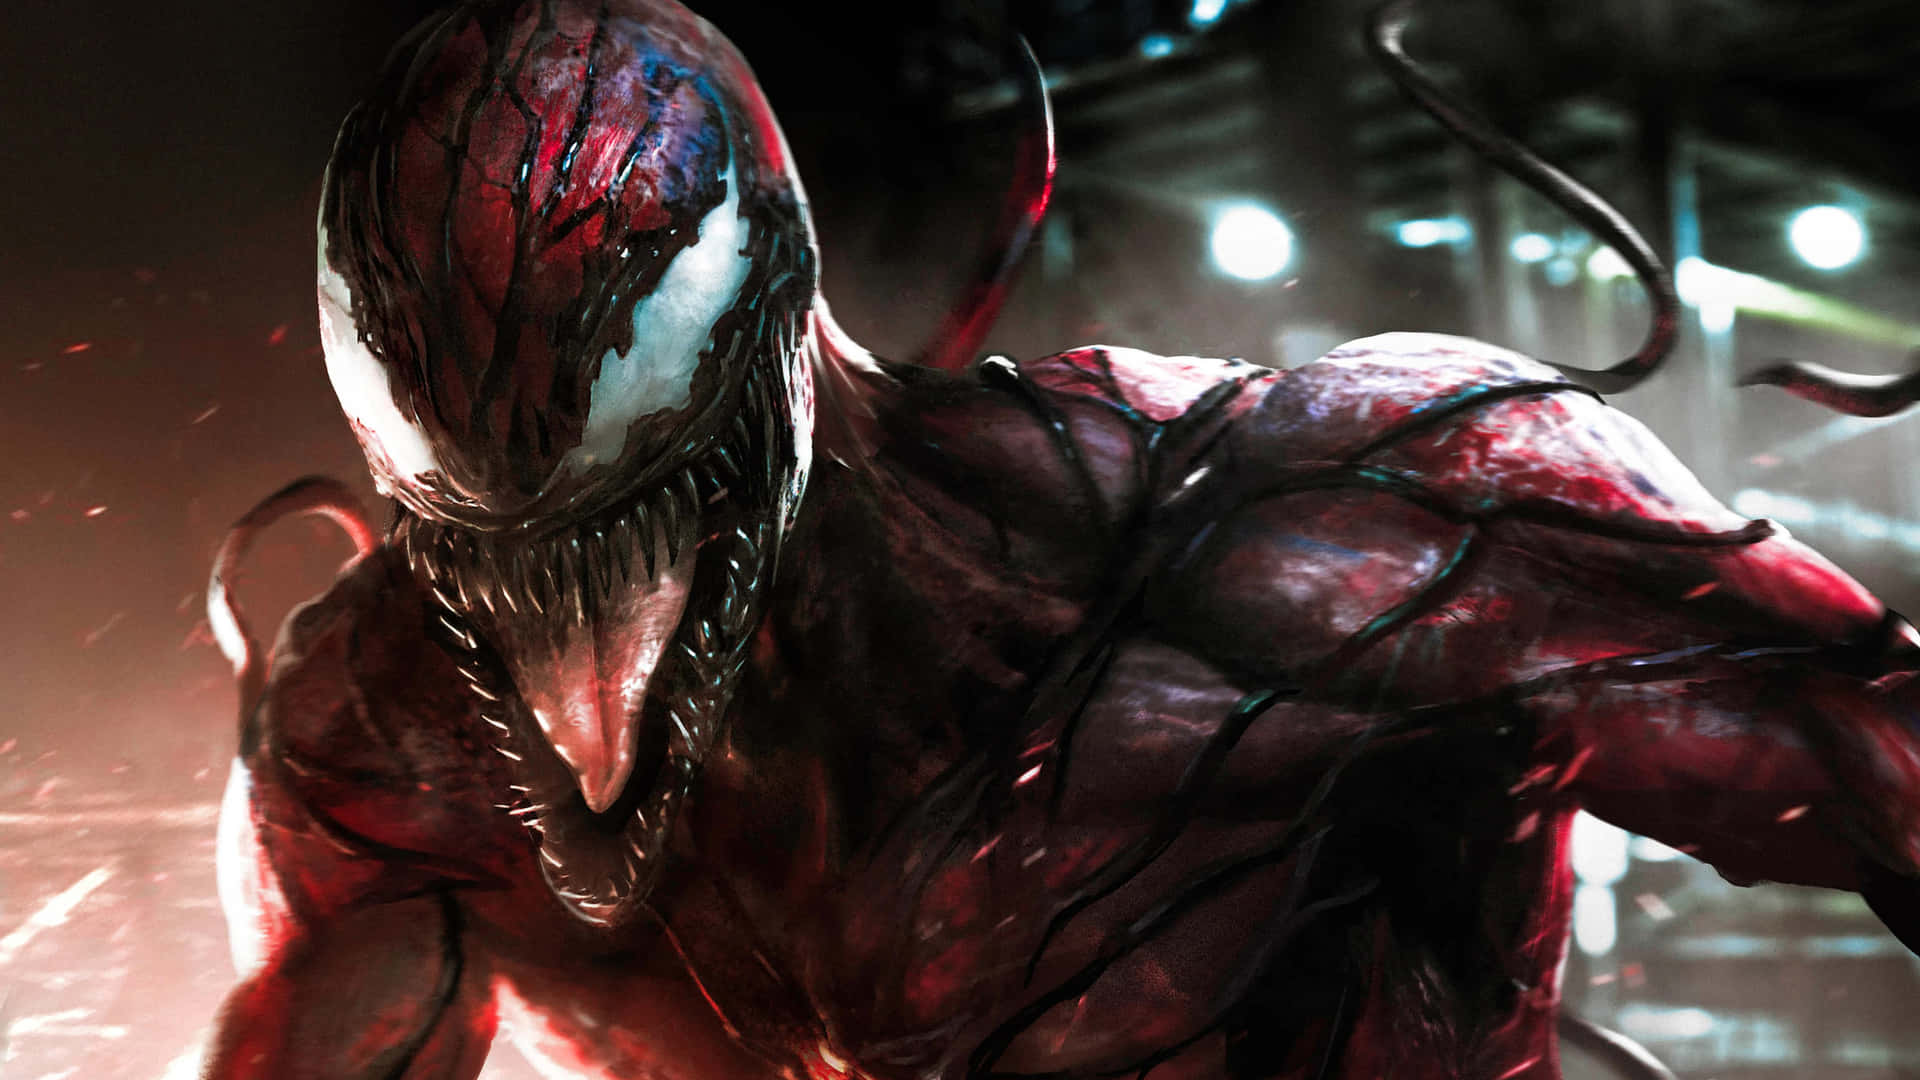 Carnage Unleashed - The Uncontrollable Symbiote